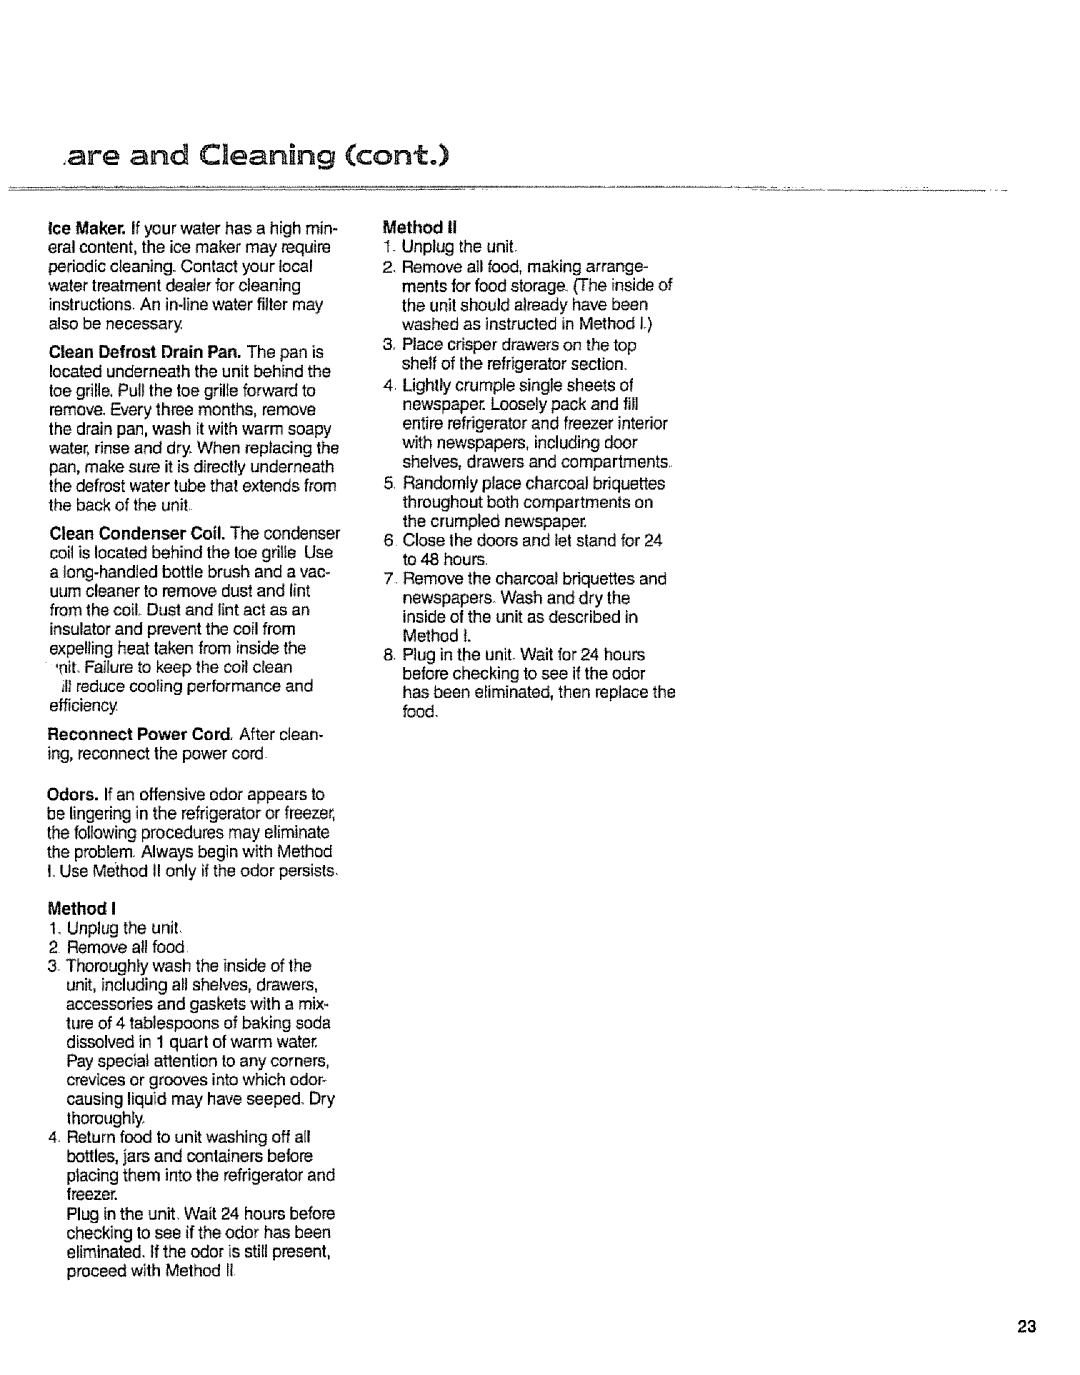 Sears 10062603 manual are and Cleaning cont, Method 